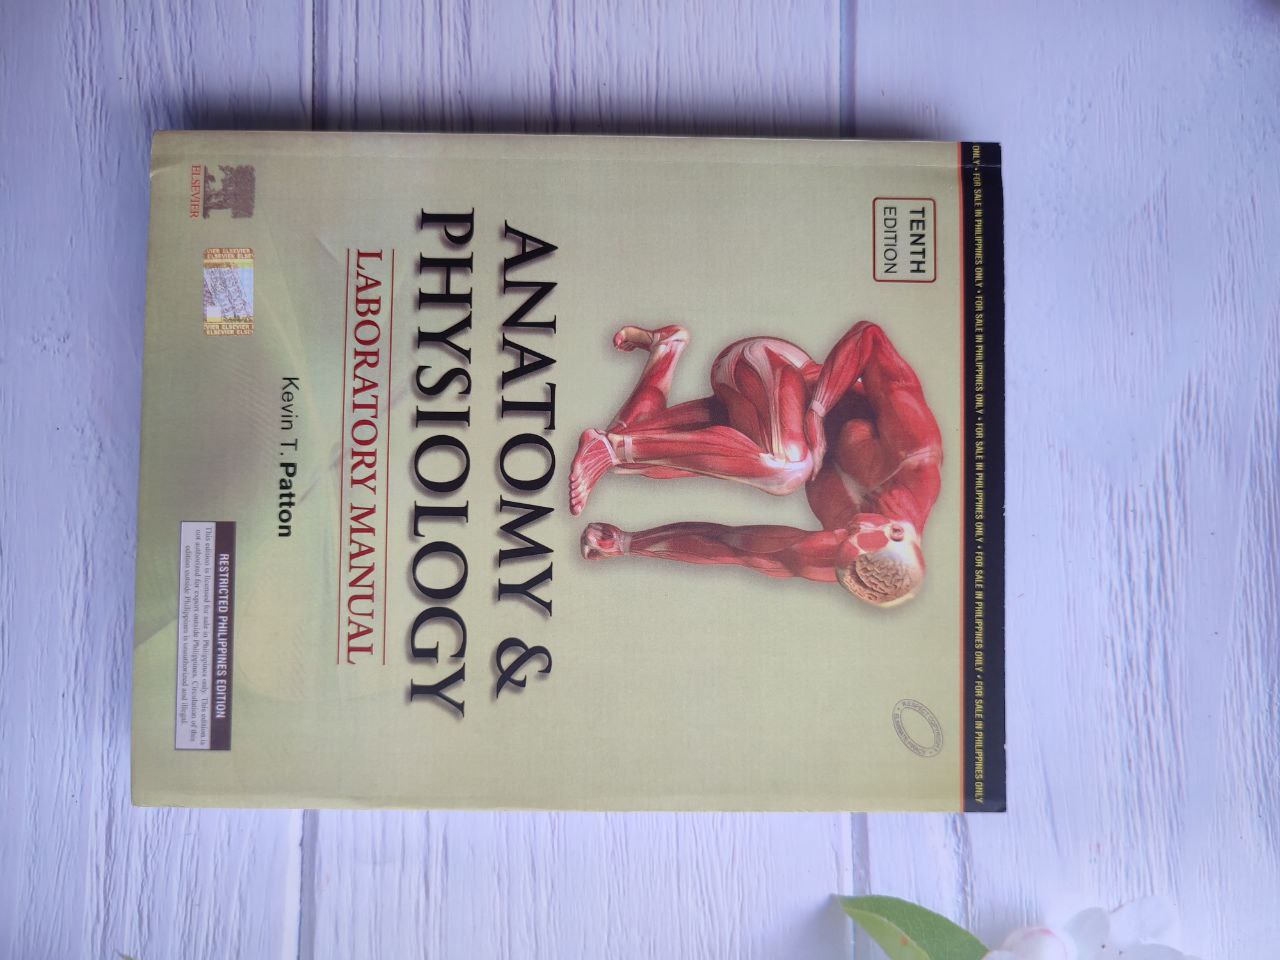 Anatomy And Physiology Laboratory Manual 10th Edition By Kevin Patton